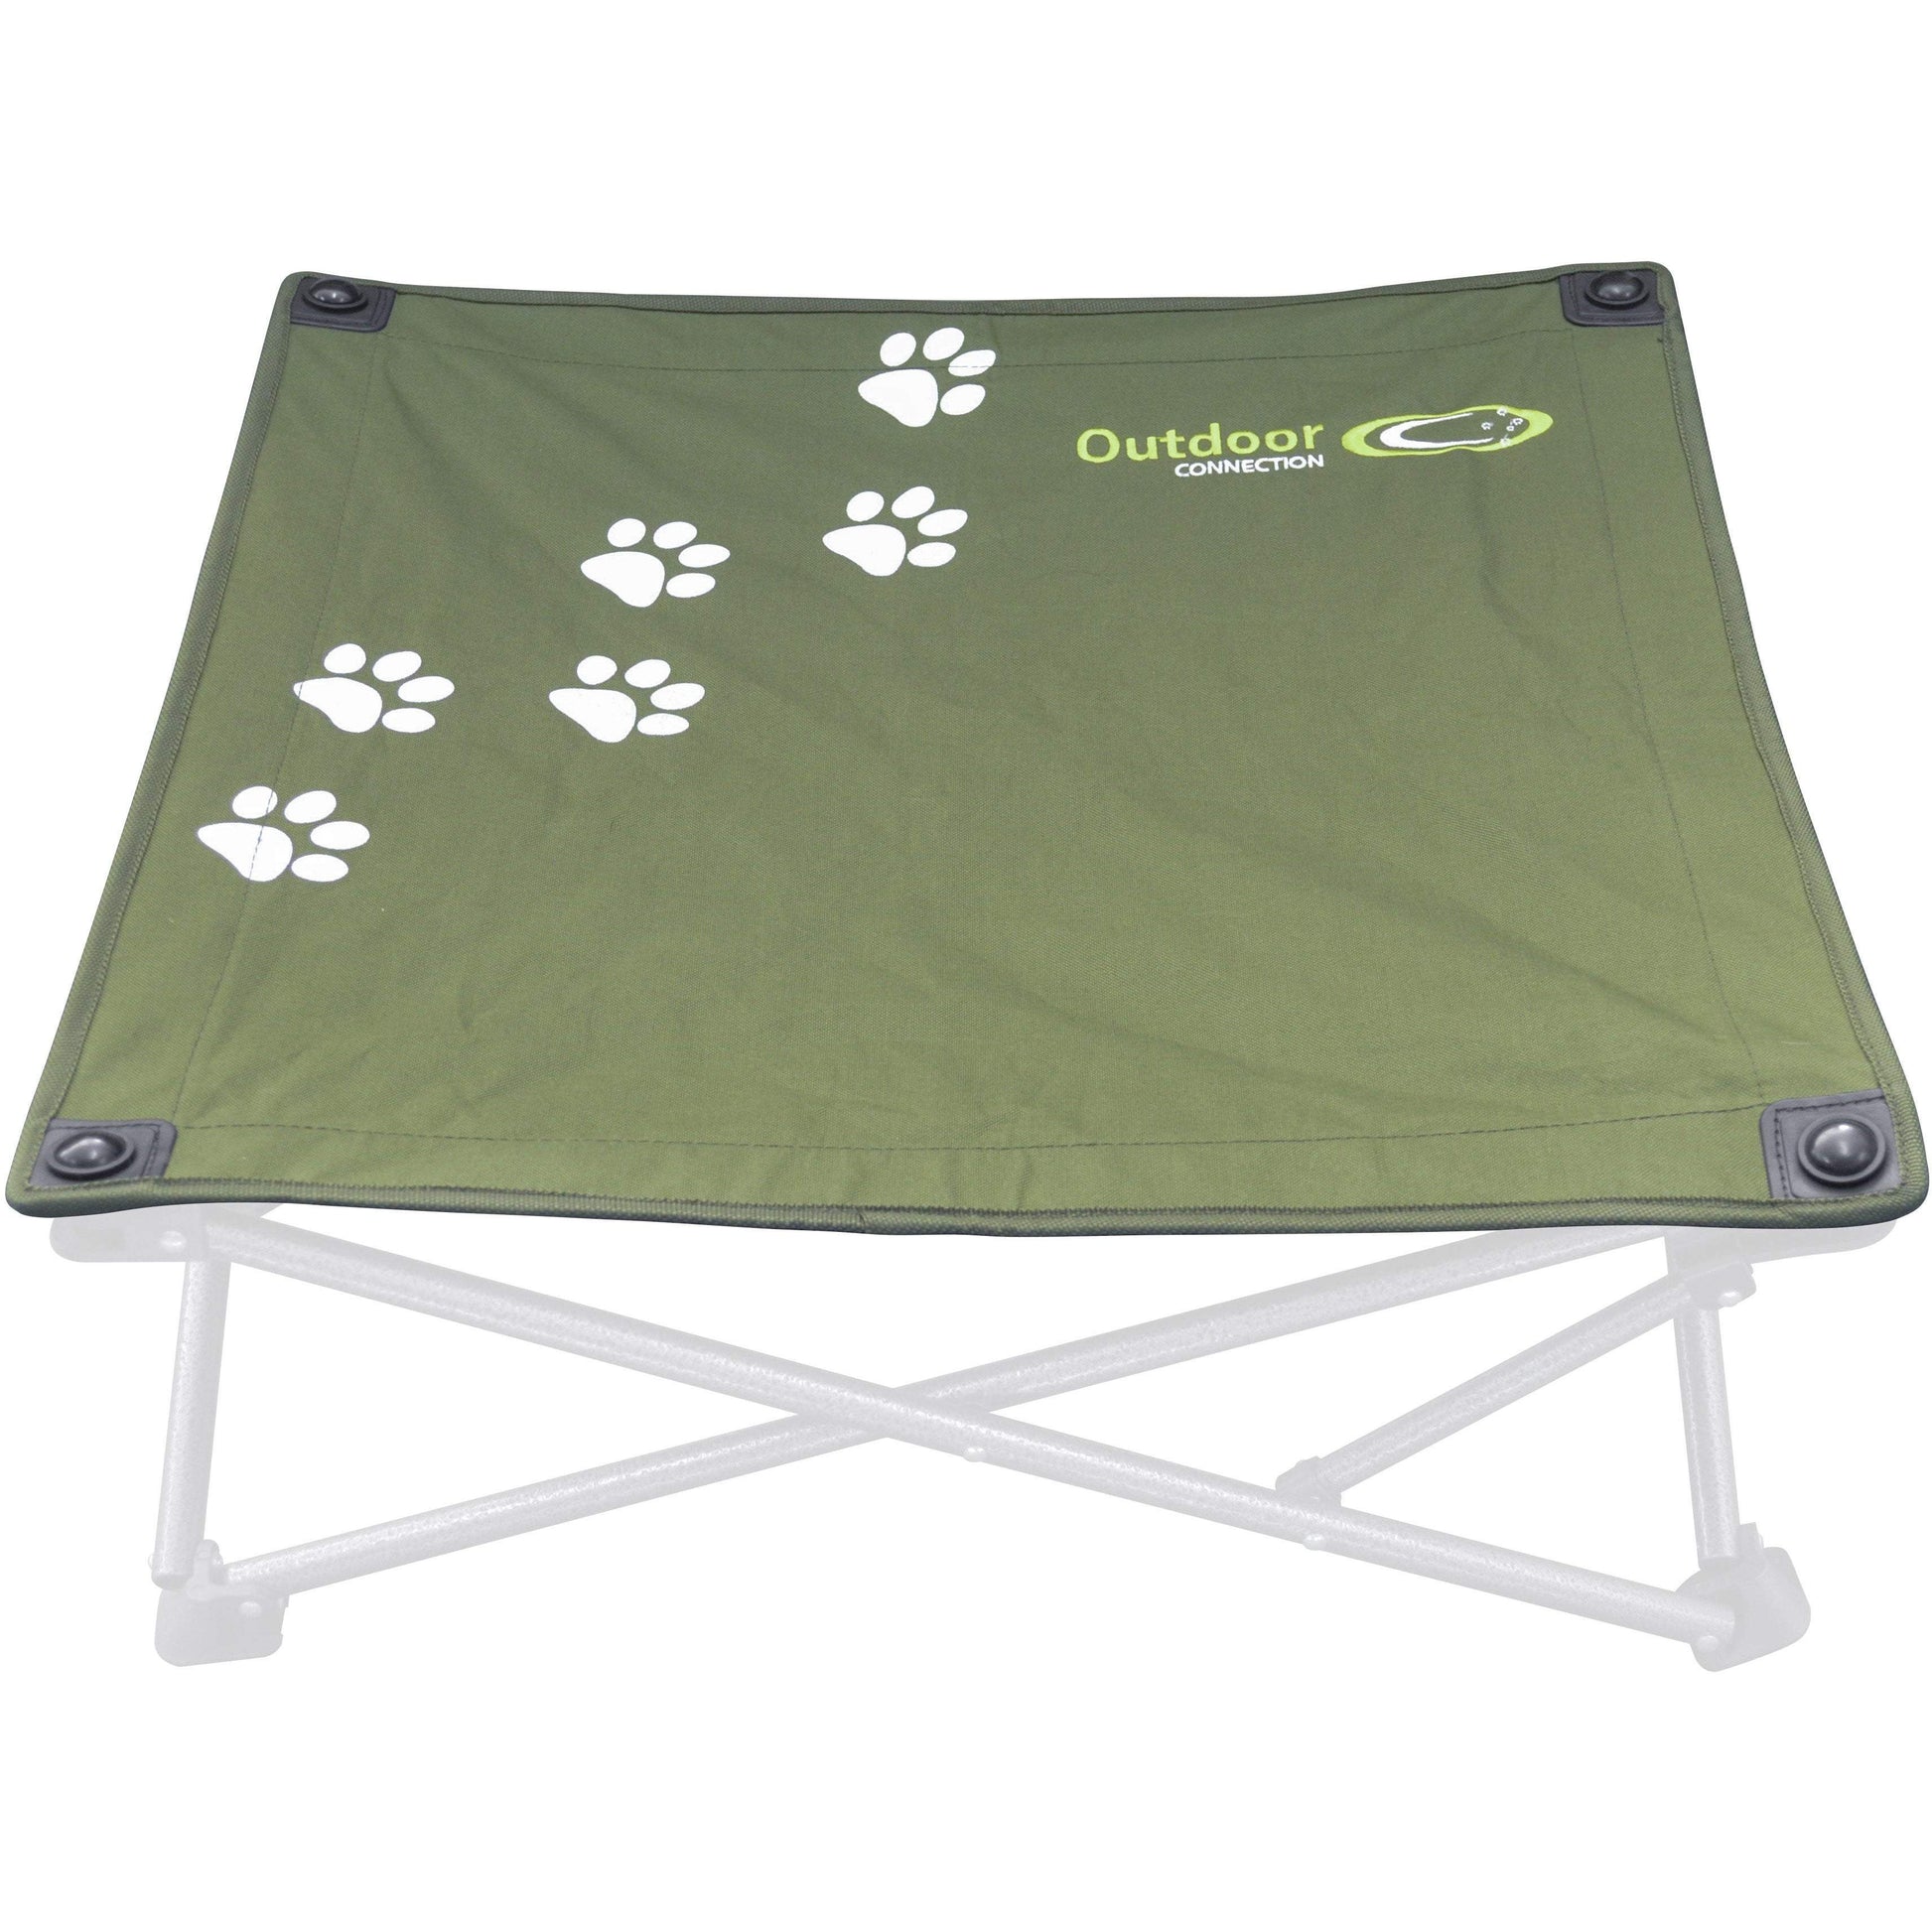 Outdoor Connection Dog Bed Replacement Cover